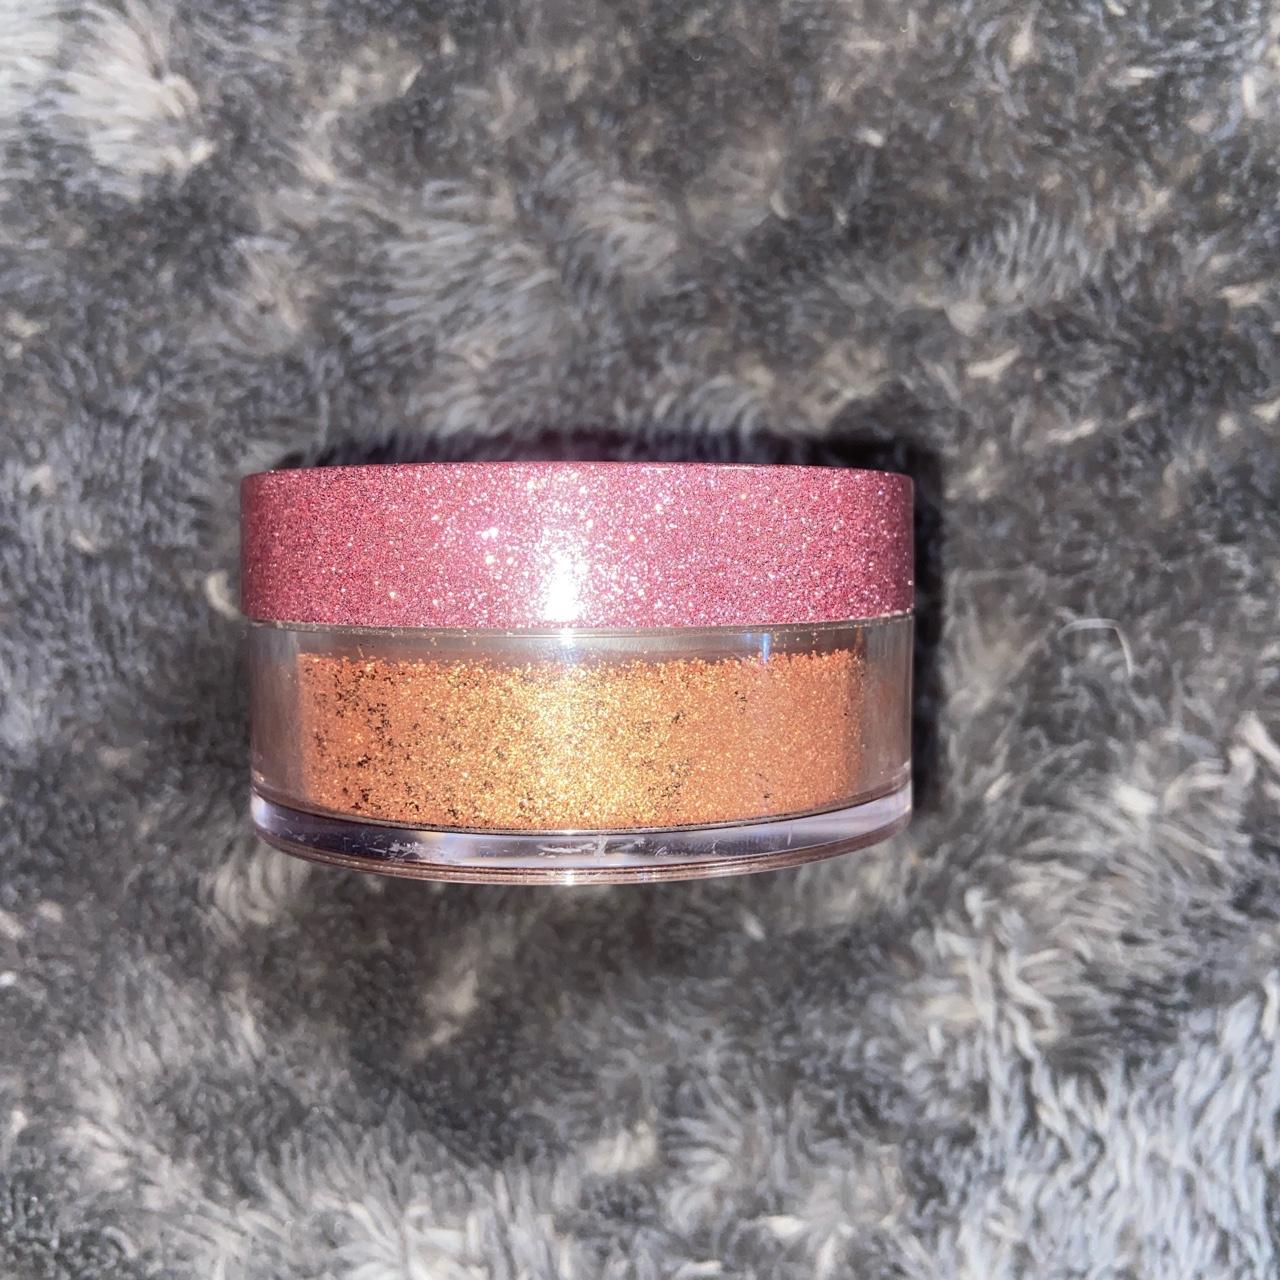 Product Image 3 - Anastasia Beverley Hills loose highlighter.